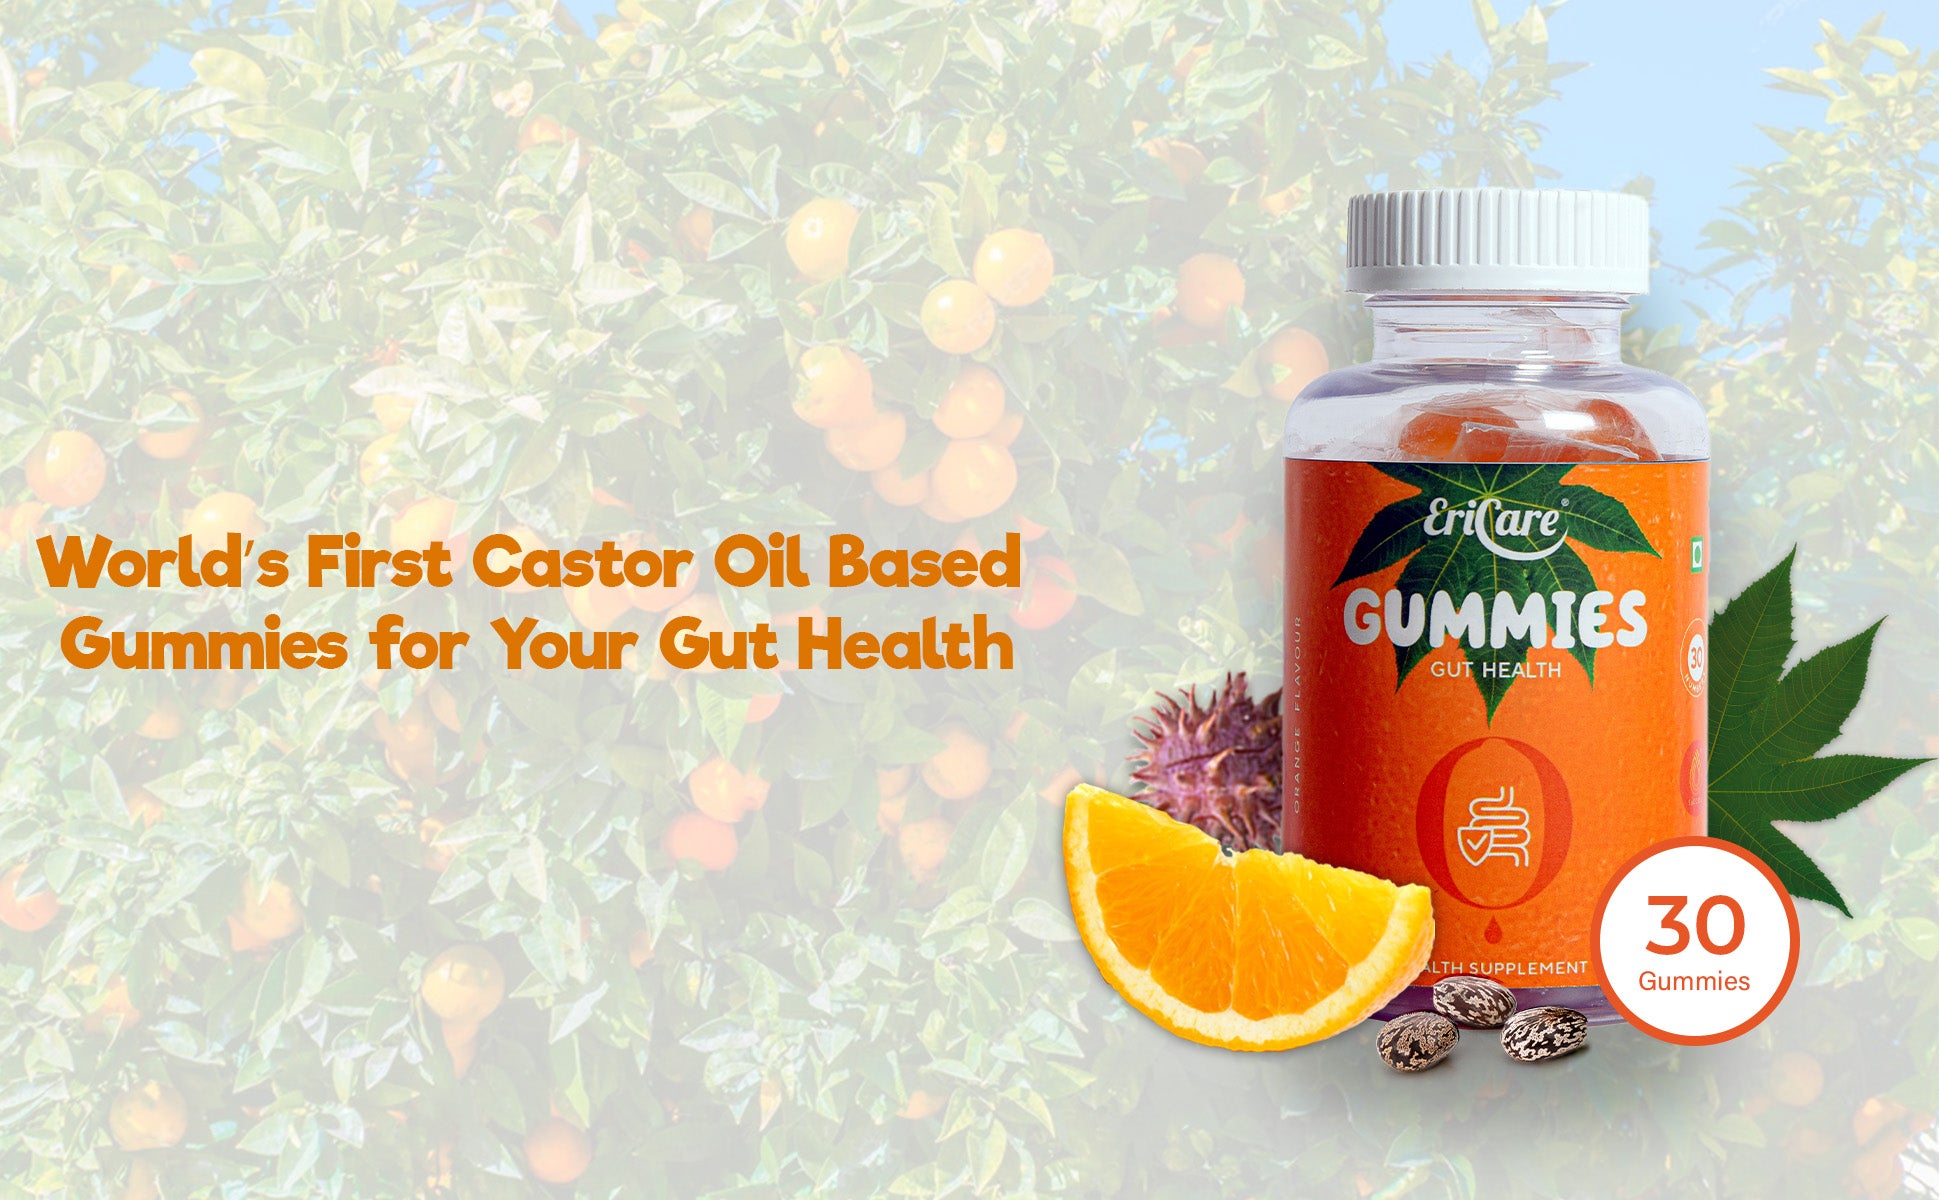 Introducing banner of EriCare Castor Oil Probiotic for happy healthy gut flora